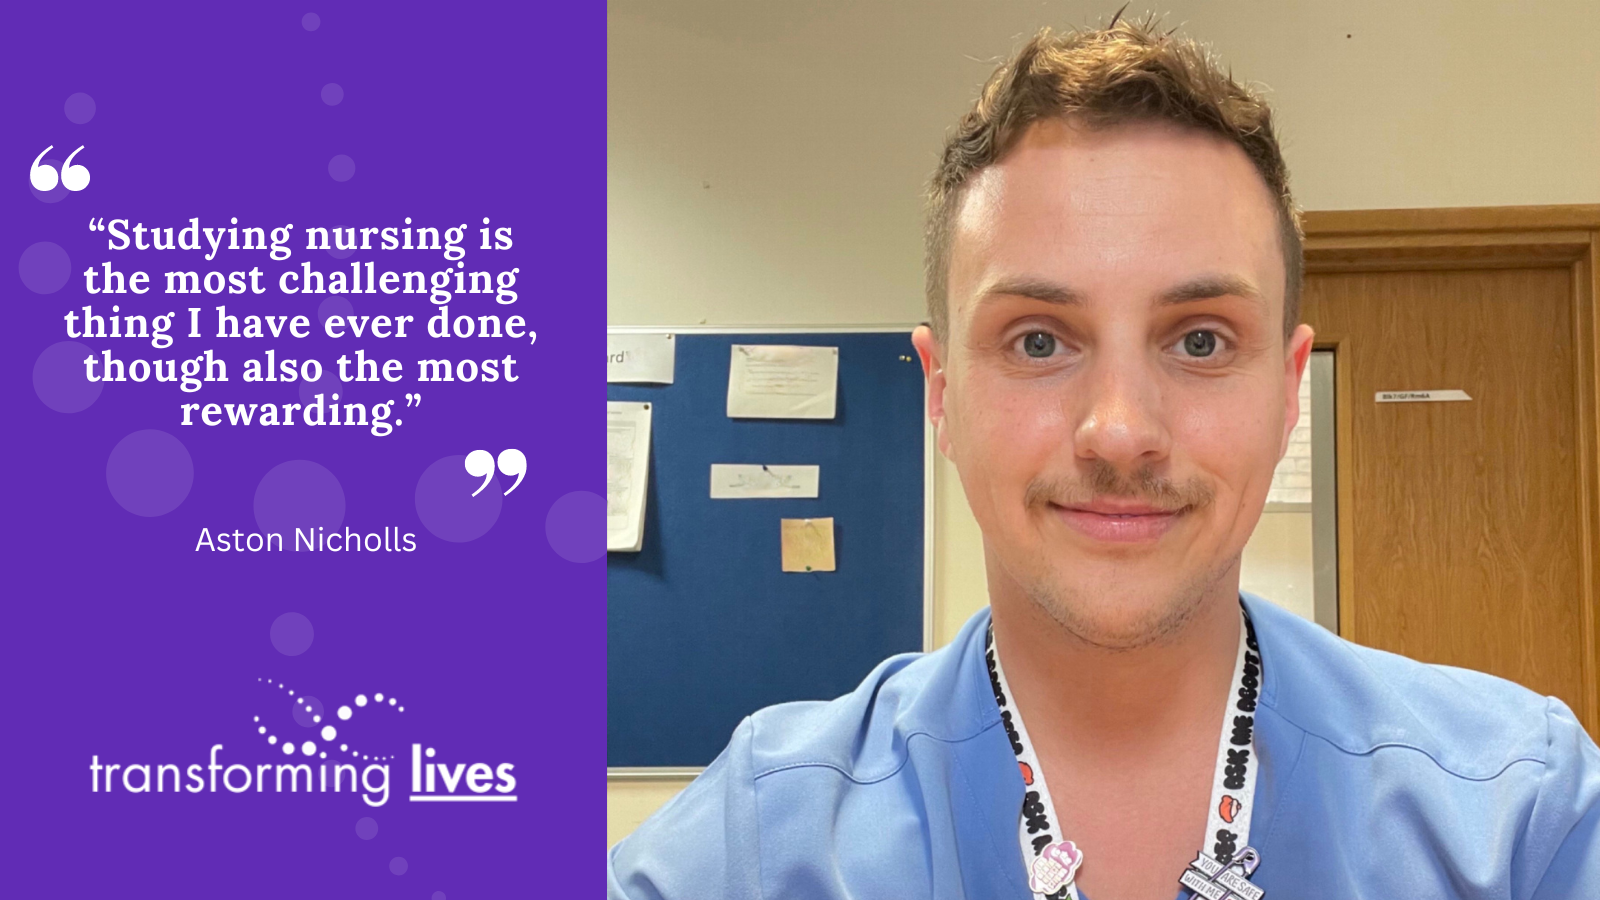 “Studying nursing is the most challenging thing I have ever done, though also the most rewarding.”